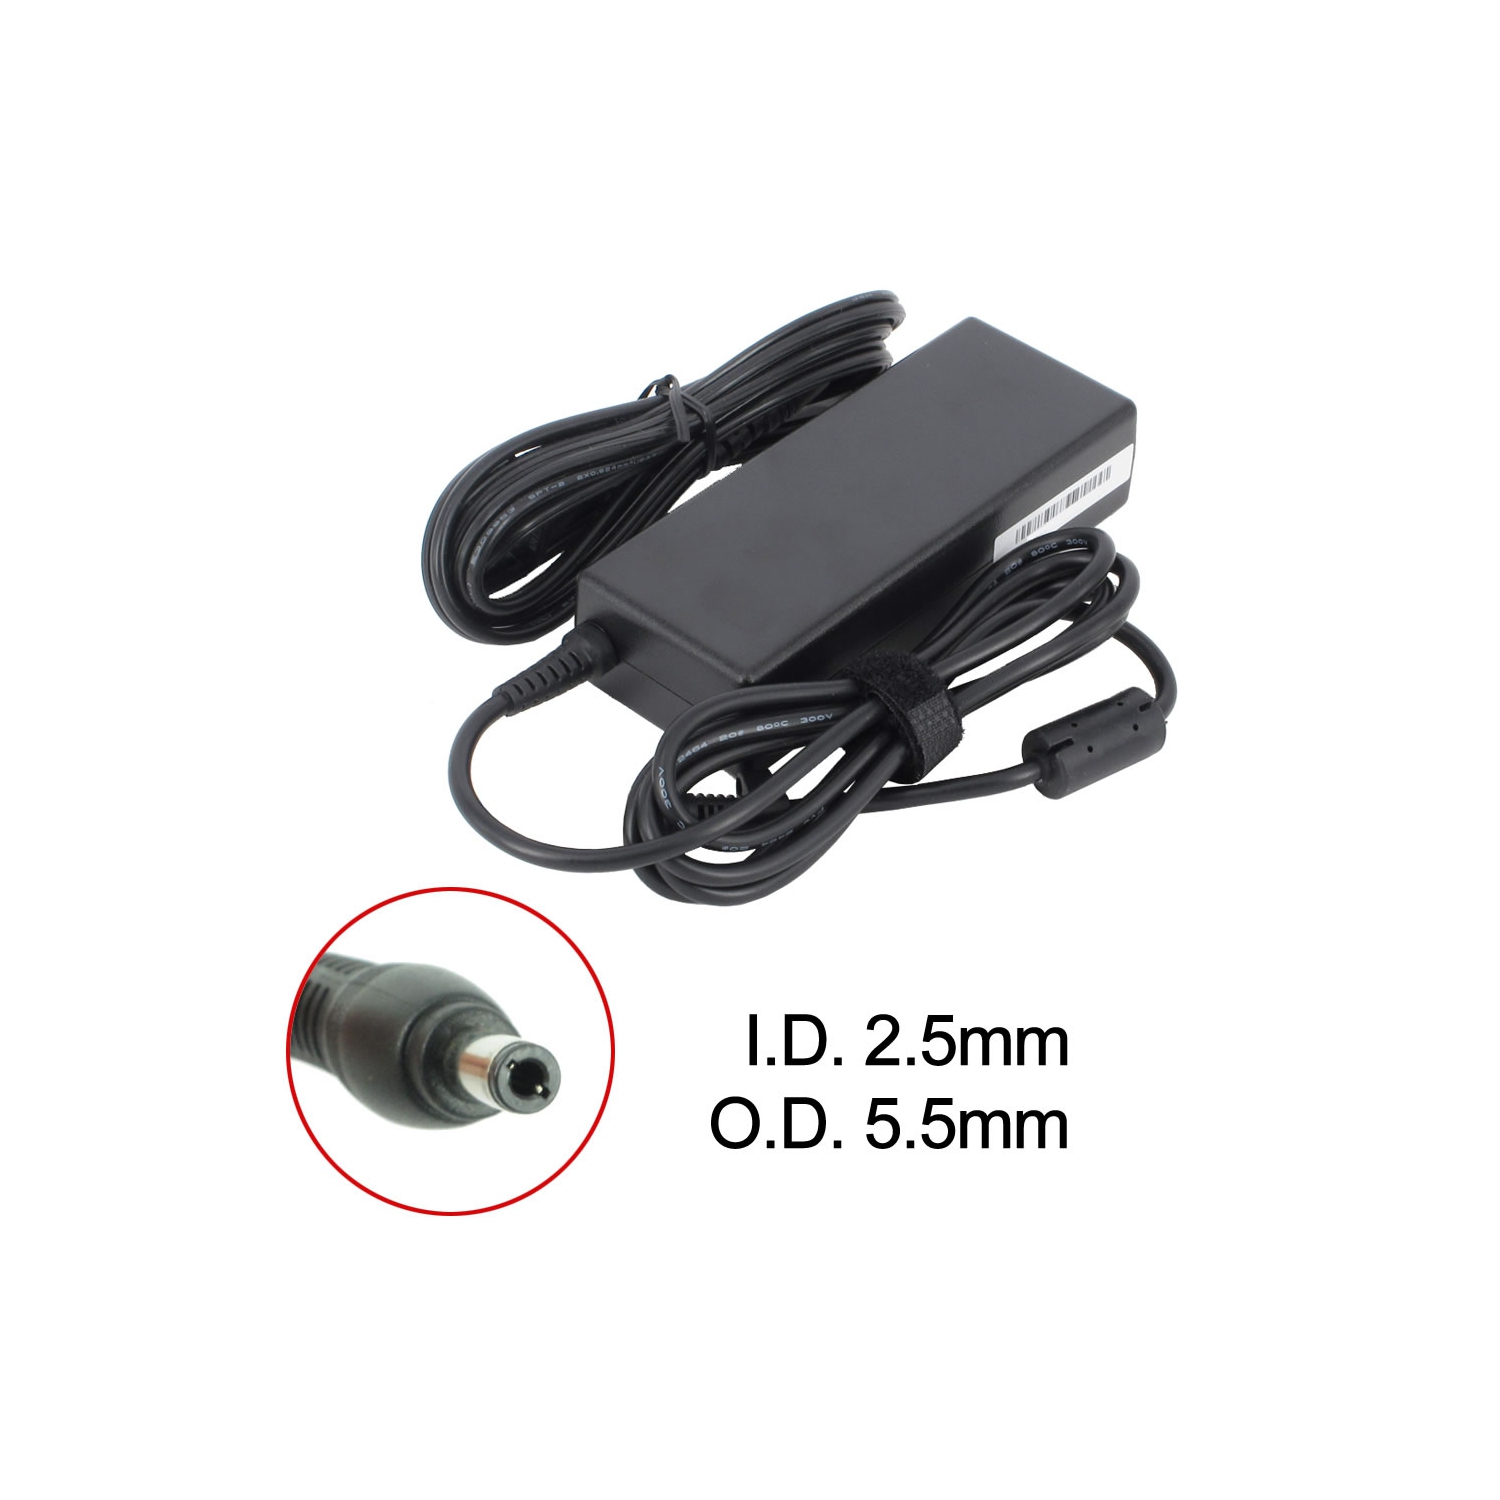 New Laptop AC Adapter for Acer Ferrari 4000, 0220A1990, 1528569, 90-N00PW5200T, ADP-65 HB BBCF, AZ121508, PA-1900-66